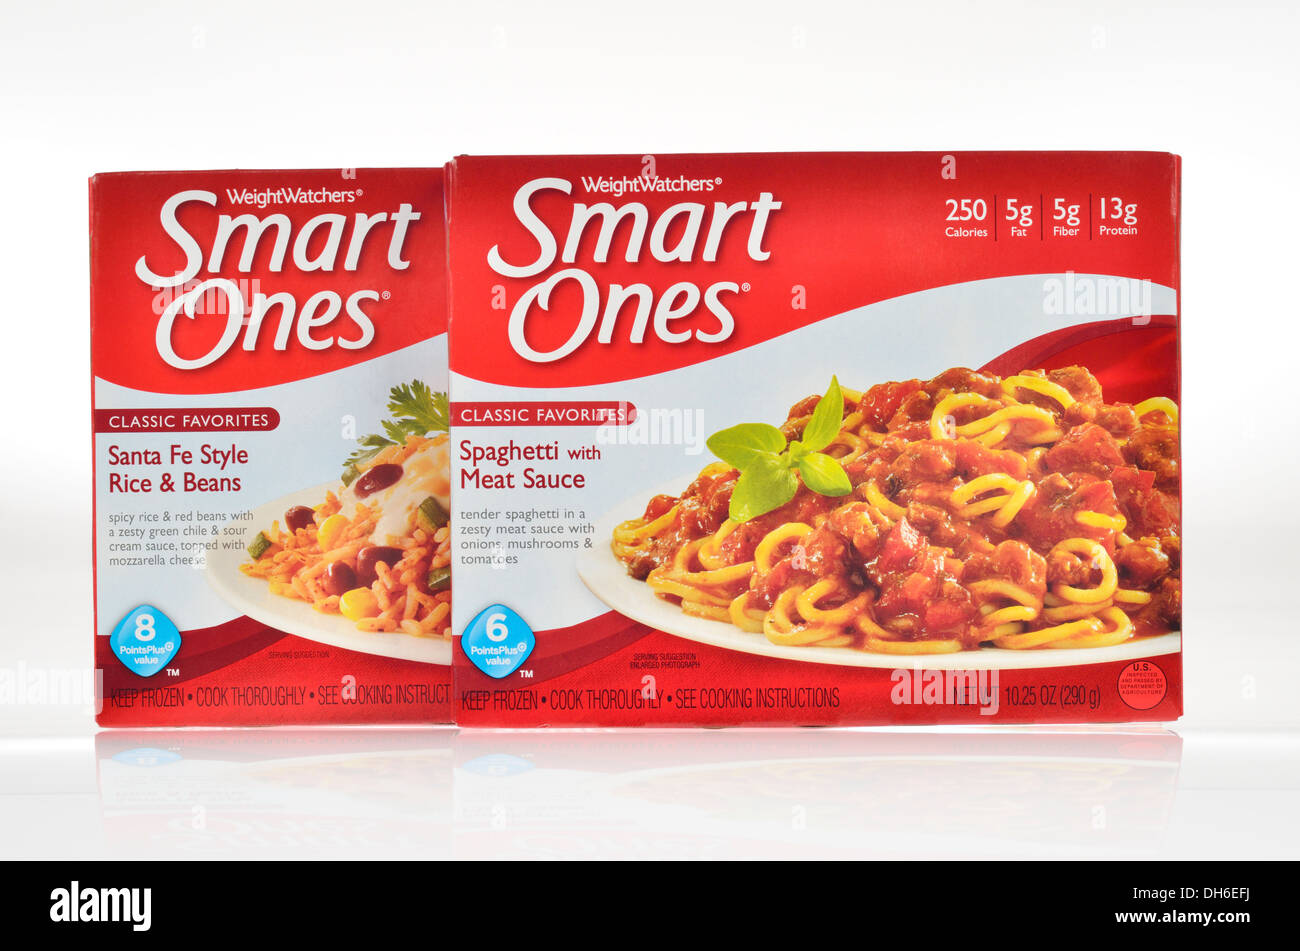 Unopened boxes of Weight Watchers Smart Ones frozen dinners on white background, cutout. USA Stock Photo